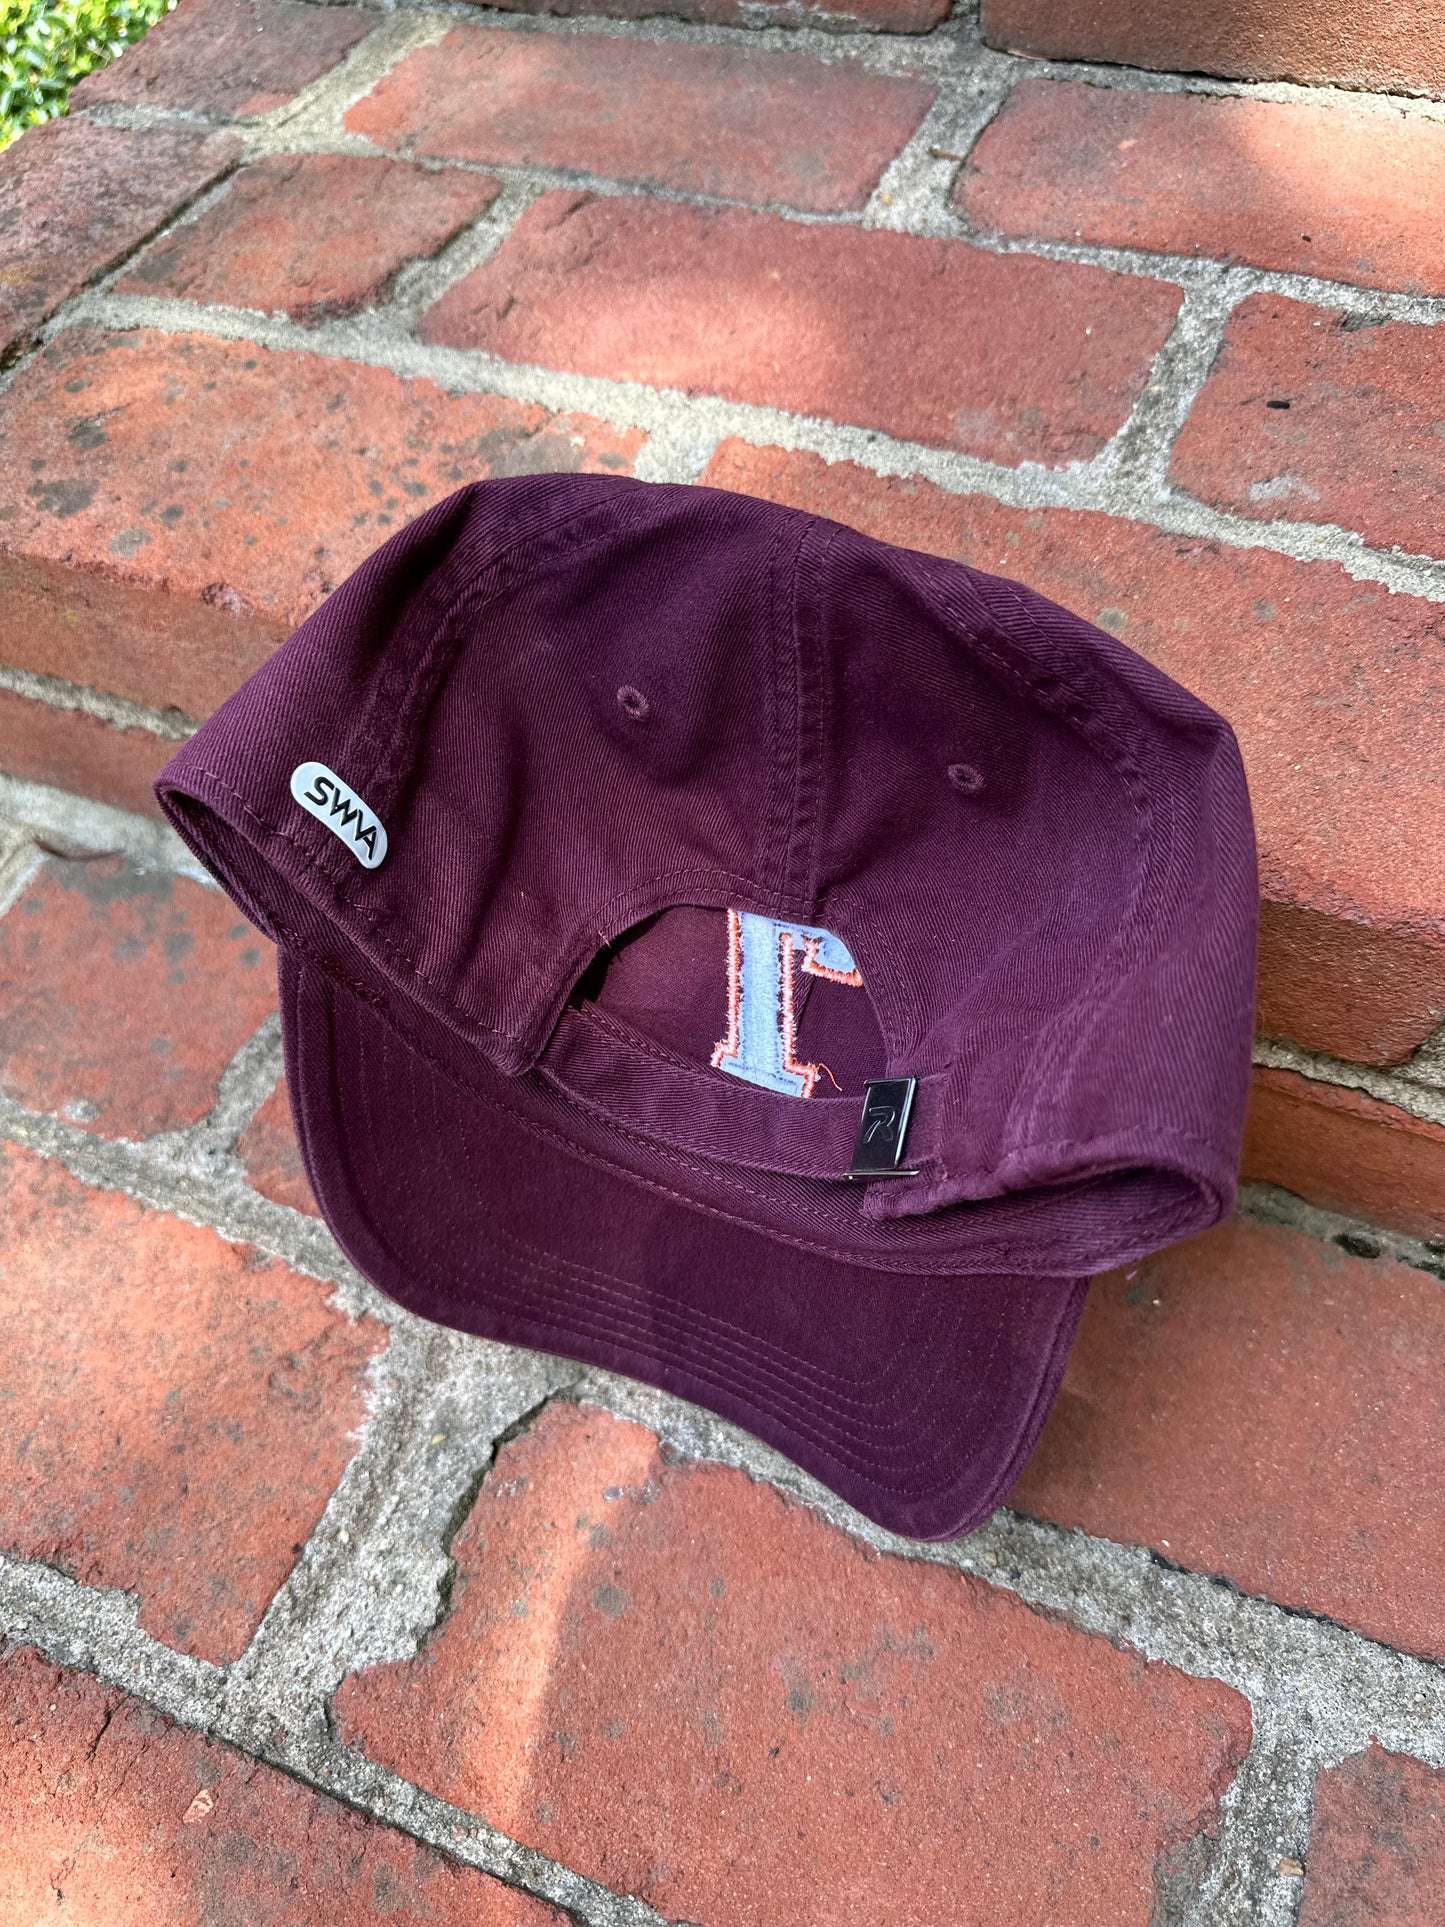 7 - Embroidered Hat